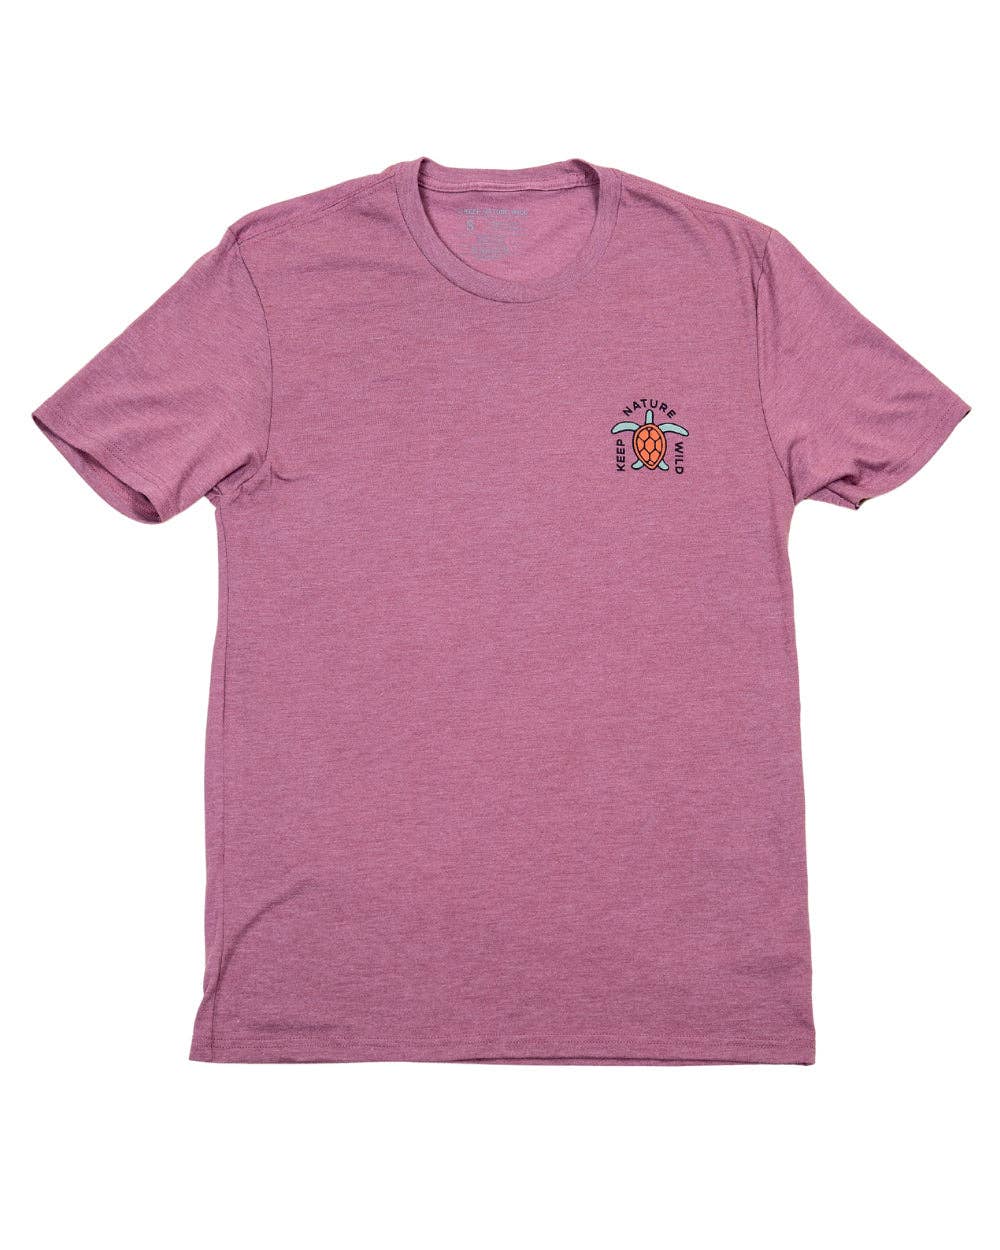 Ocean's are Calling Pink Turtle shirt by Keep Nature Wild